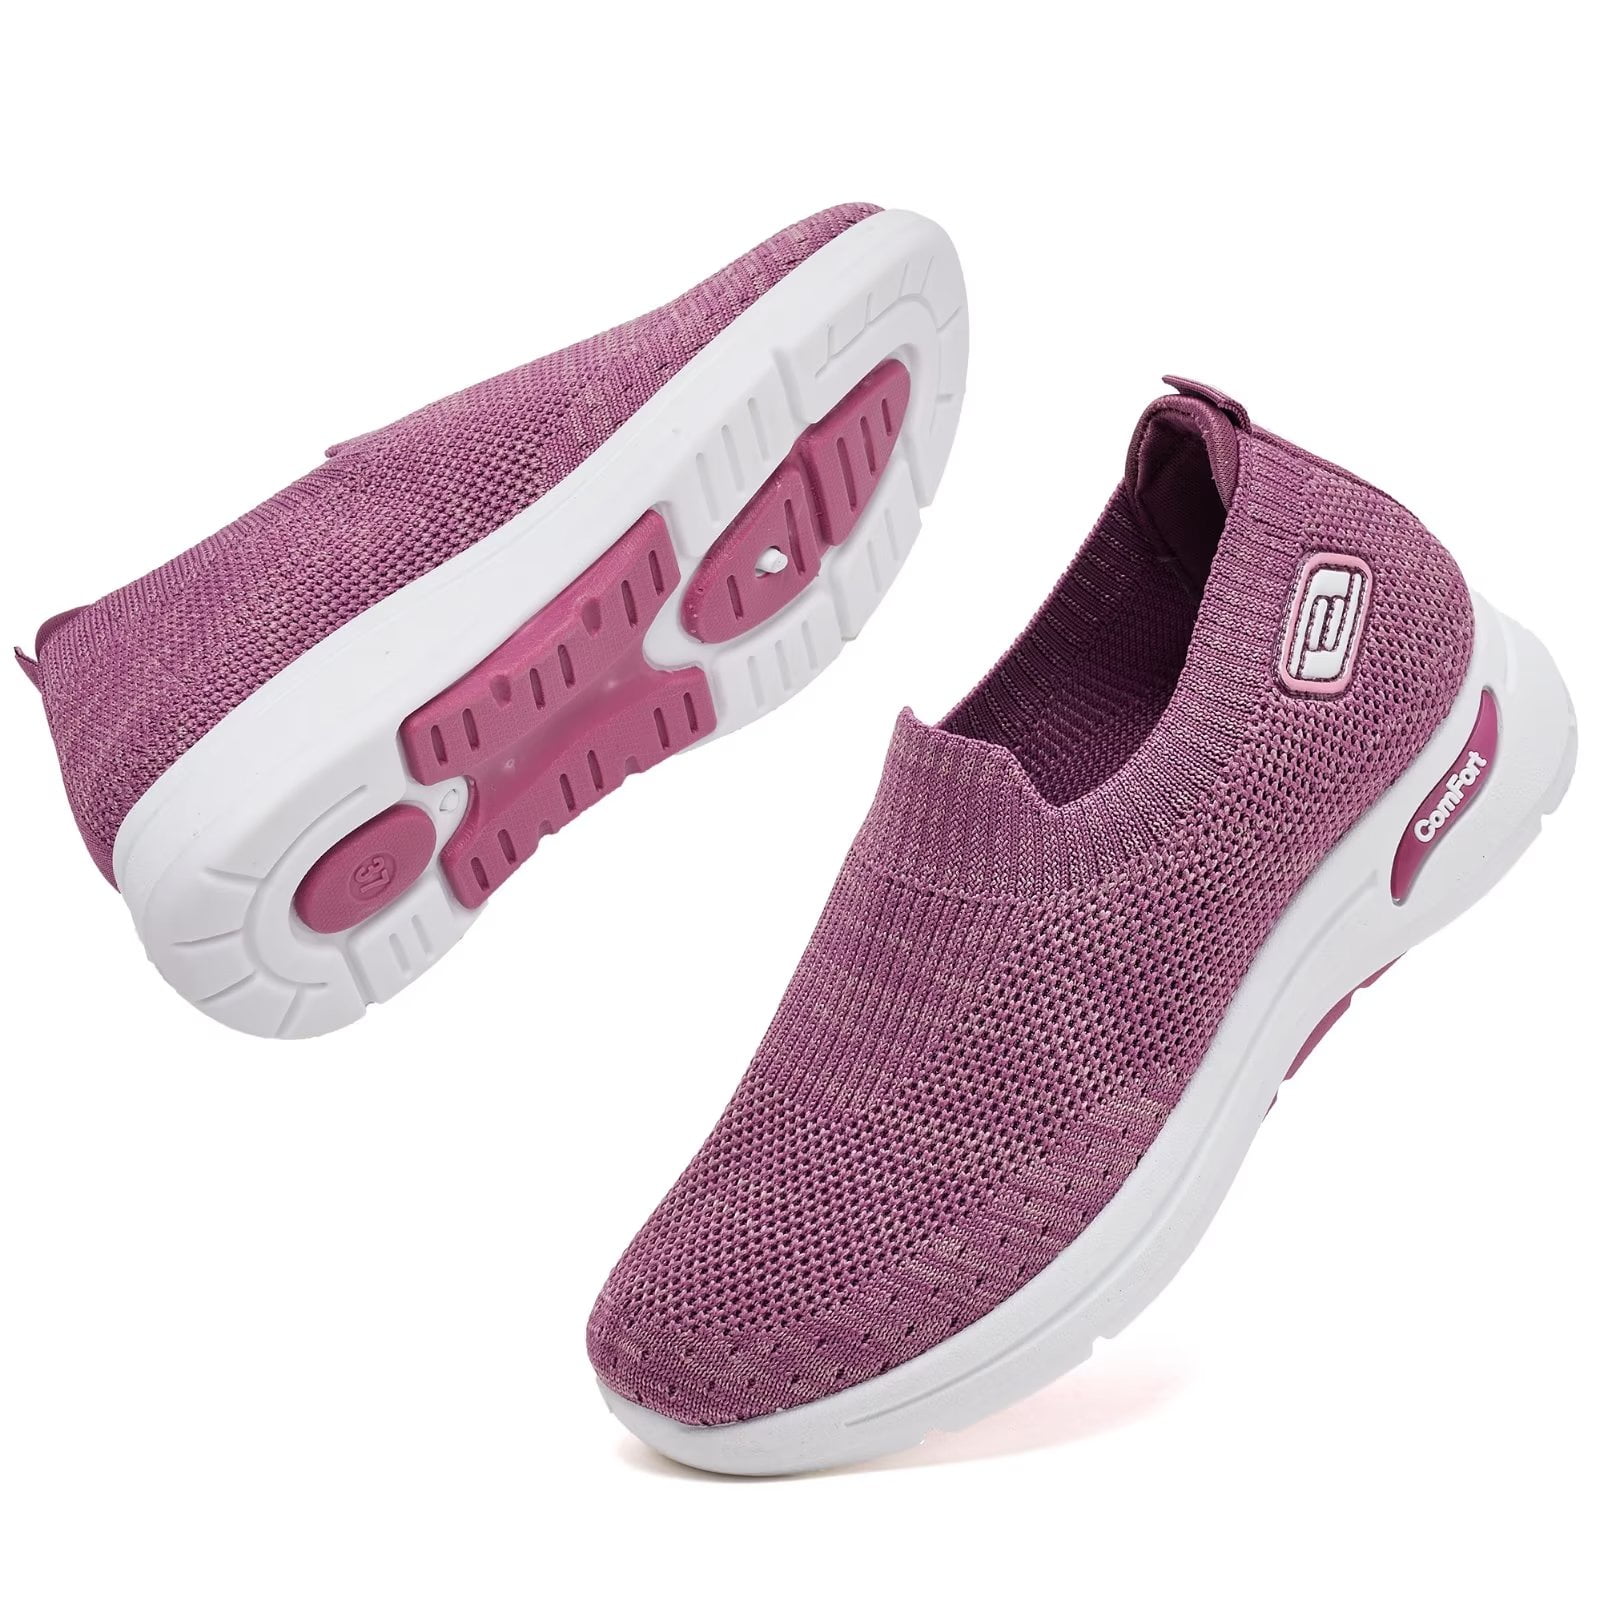 SLY Slip On Sneakers for Women Lightweight Walking Shoes Arch Support ...